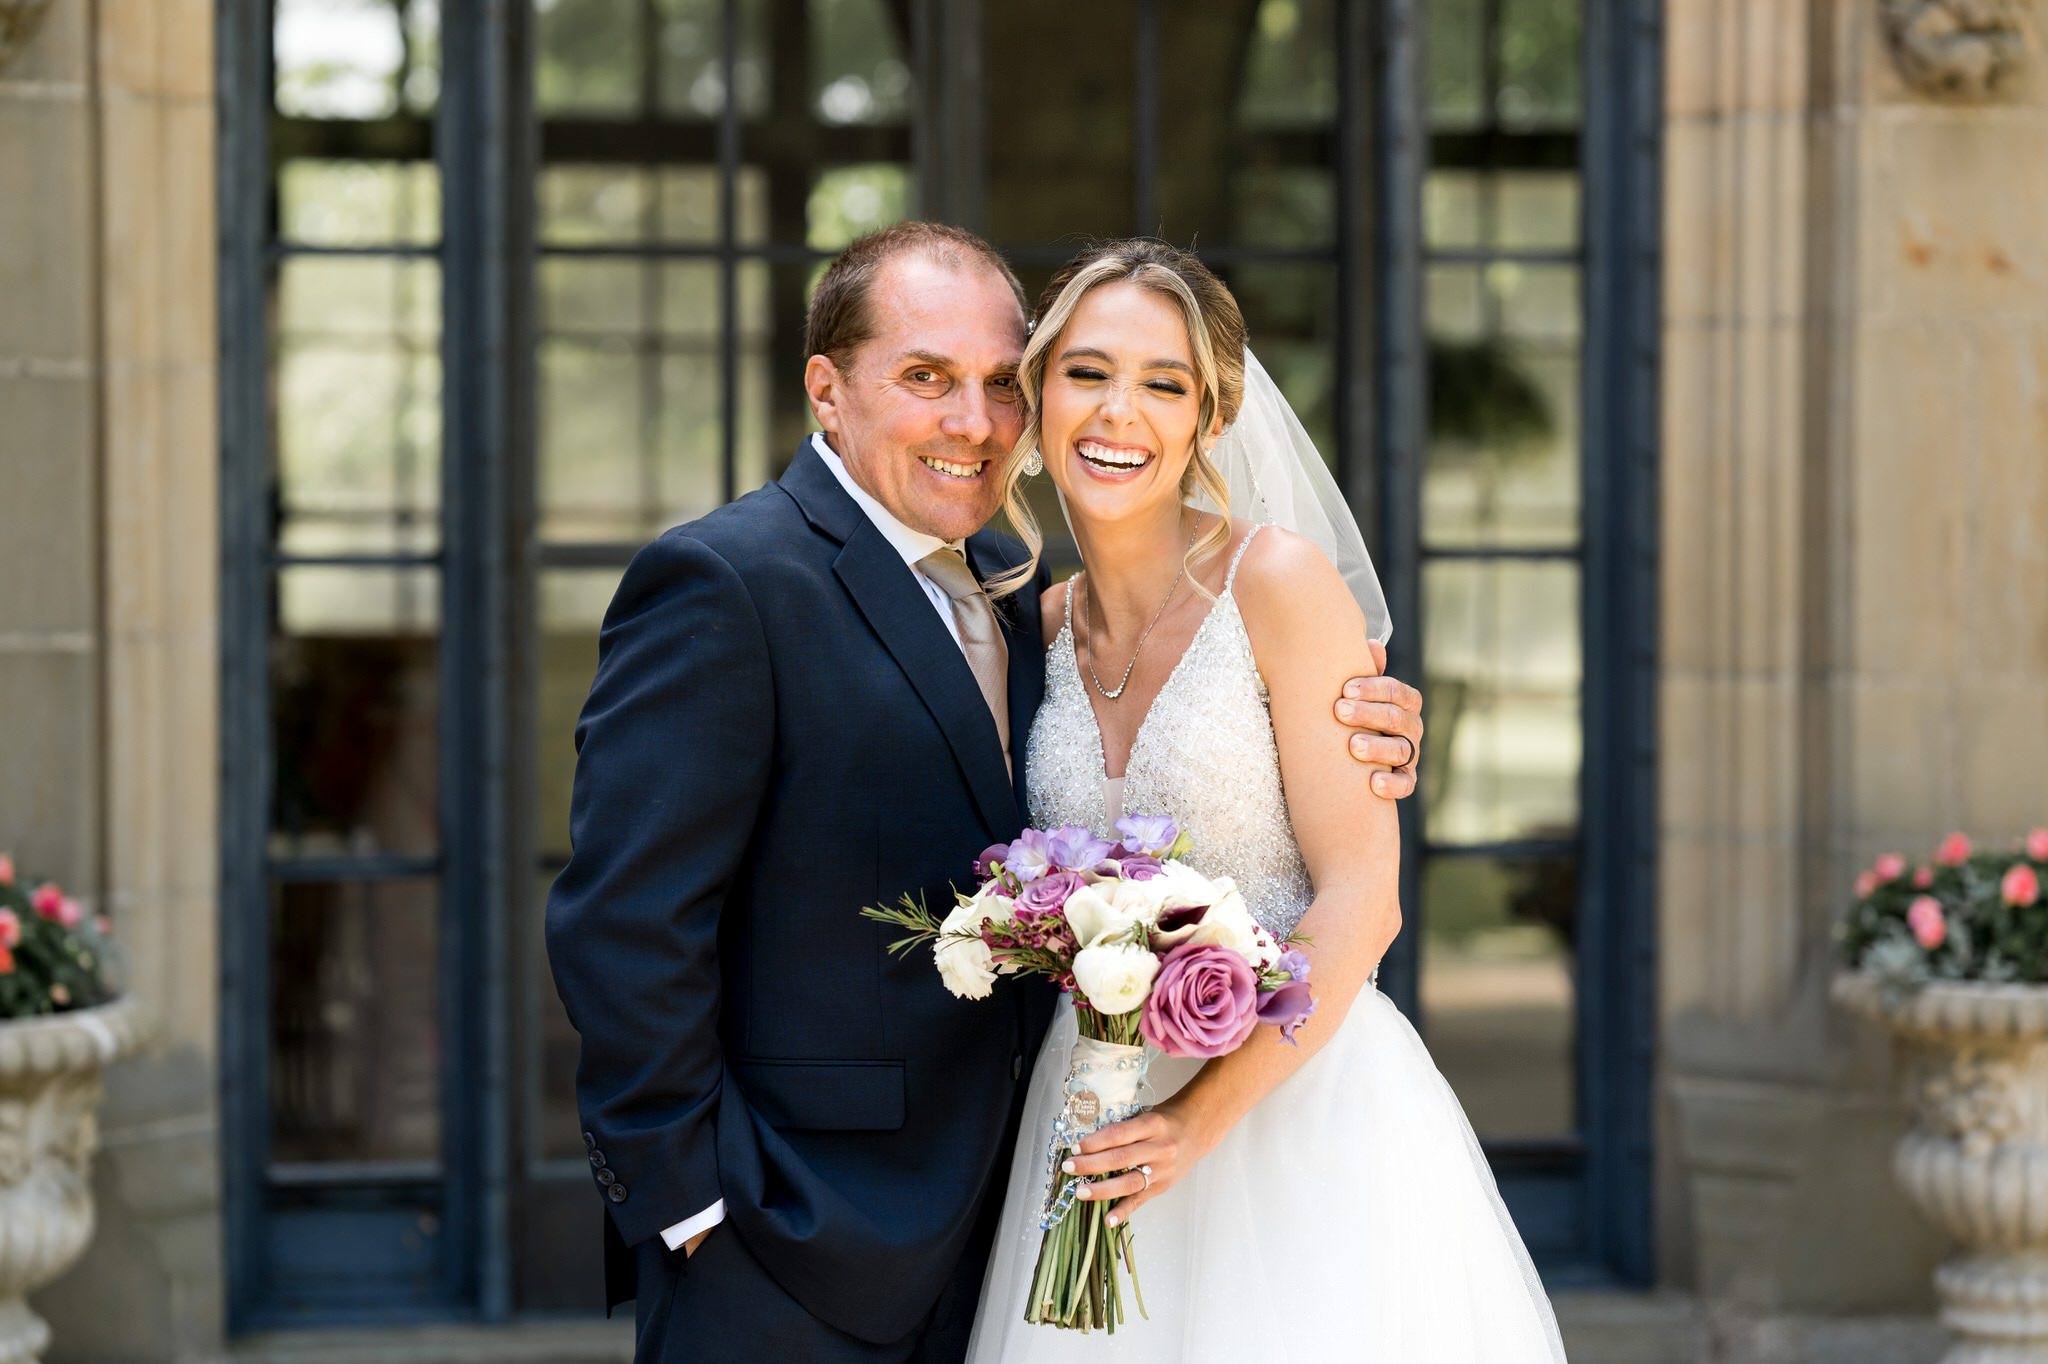 Bride and her dad pose for a photo at her wedding at Meadowbrook Hall.